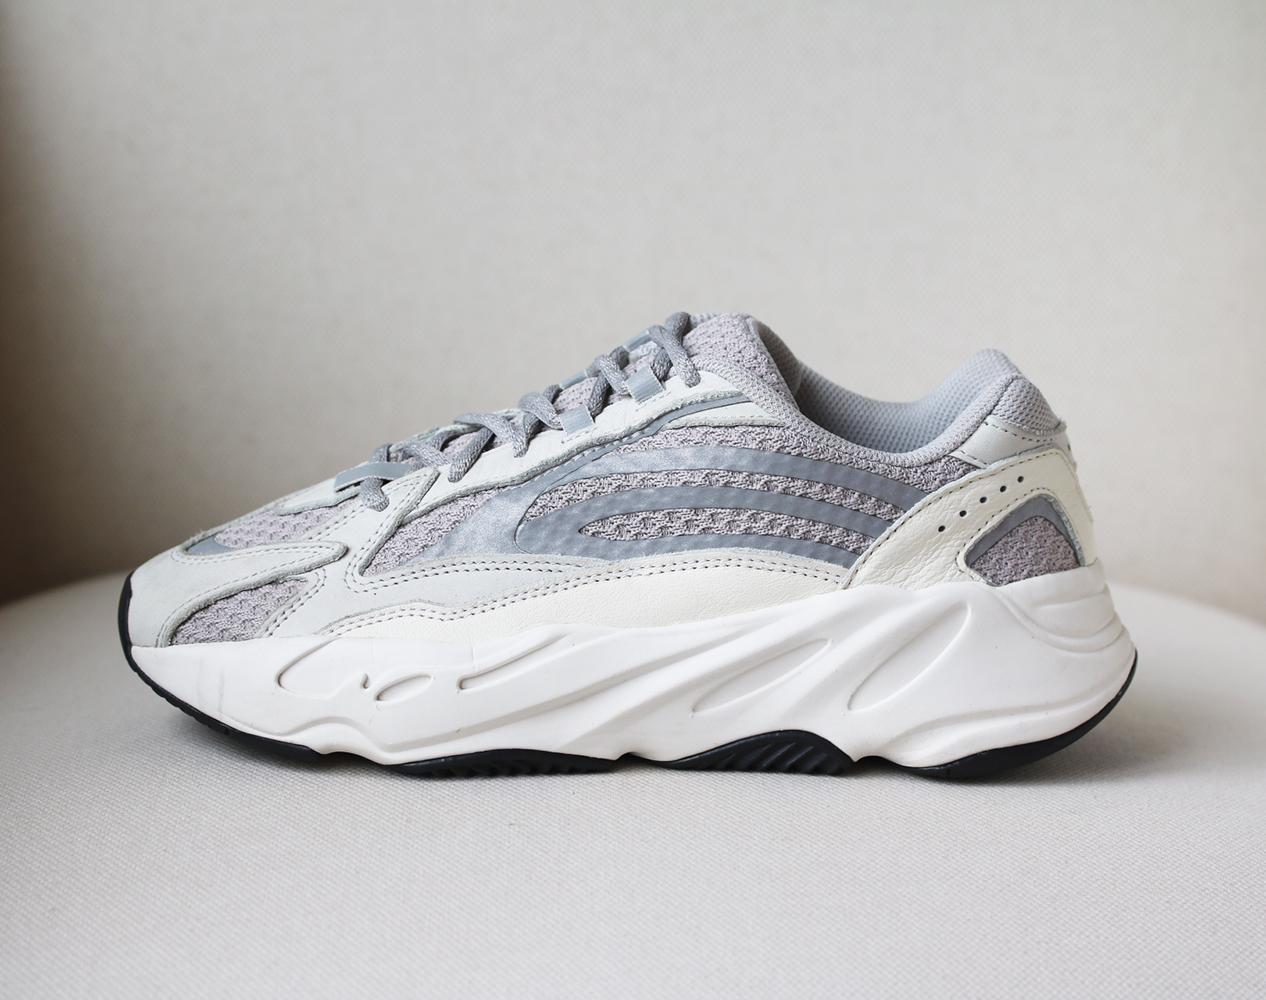 Since adidas Originals' first collaboration with Kanye West back in 2013, each release has garnered huge success - we expect his 'Yeezy Boost 700 V2' sneakers will cause the same kind of frenzy. 
This off-white, grey, silver and white pair is made